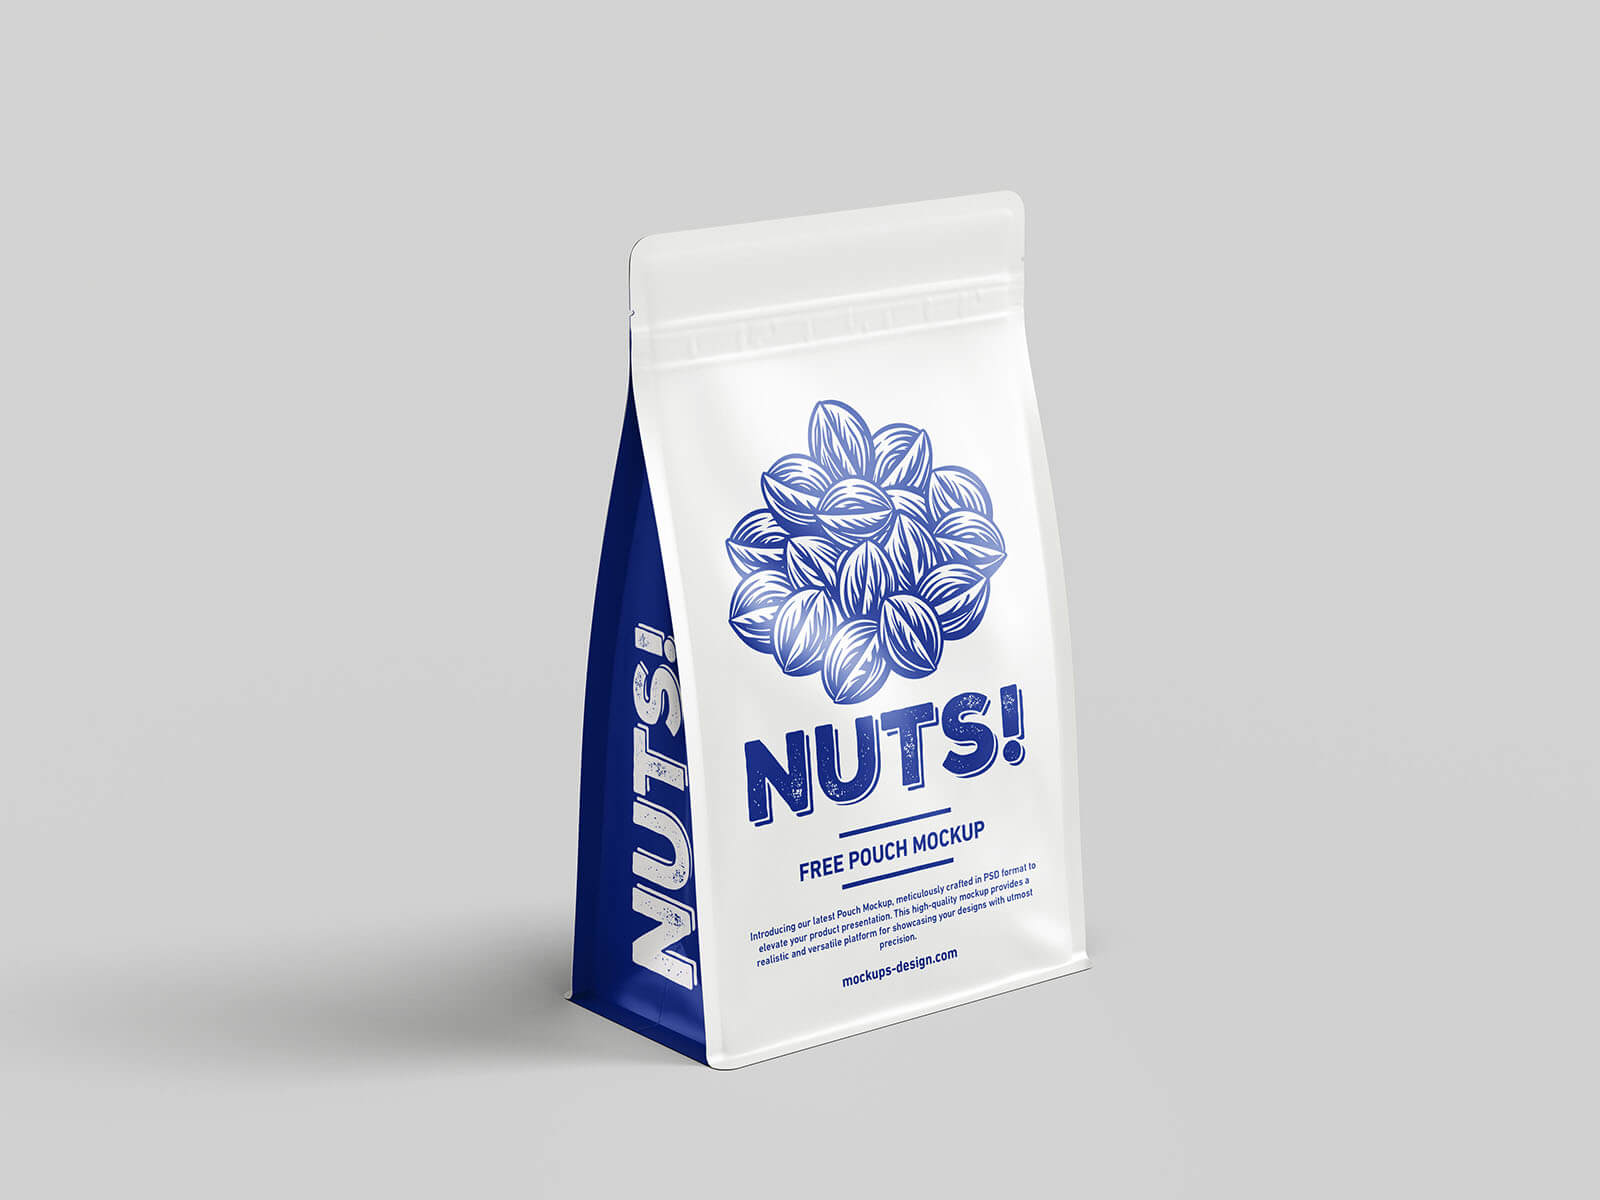 Free Pouch Mockup 1